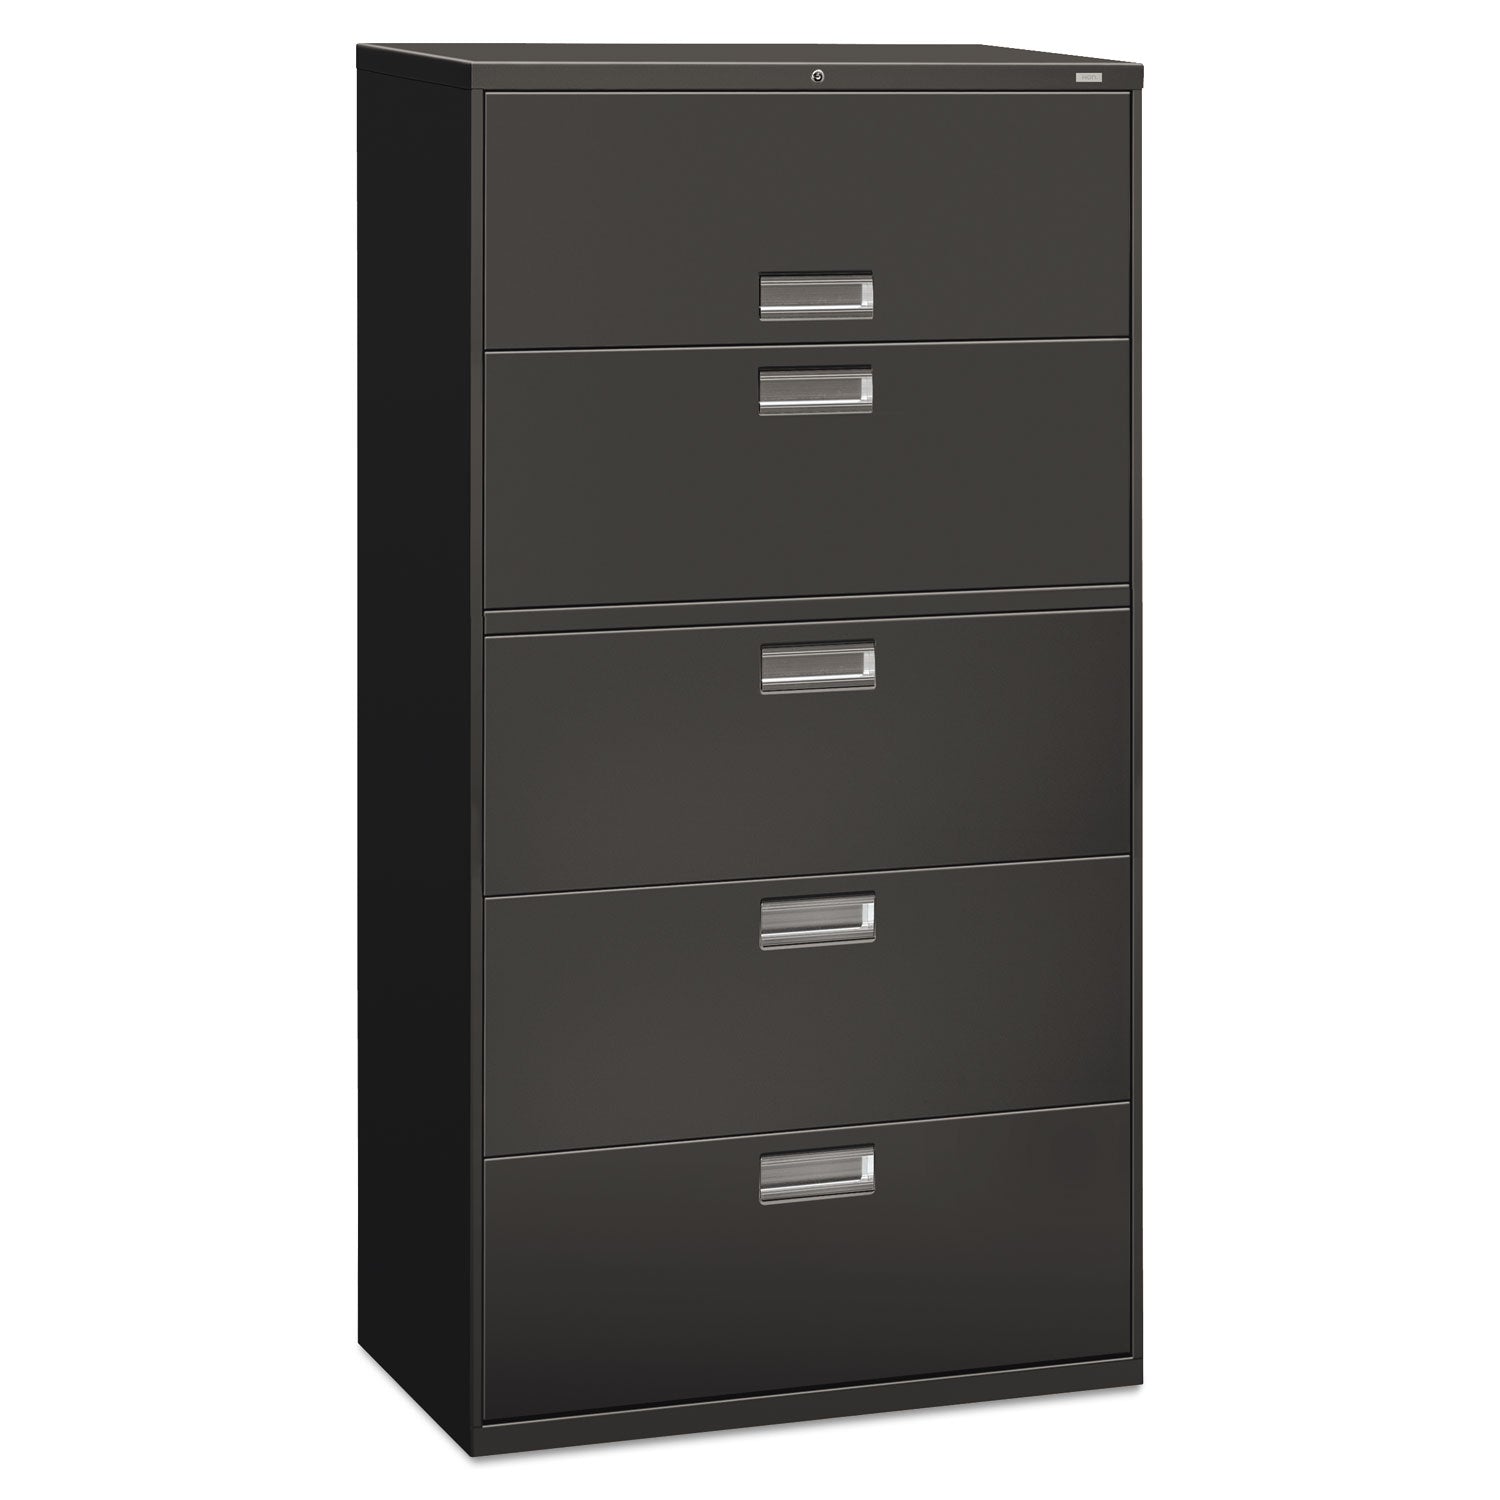 Brigade 600 Series Lateral File, 4 Legal/Letter-Size File Drawers, 1 Roll-Out File Shelf, Charcoal, 36" x 18" x 64.25 - 